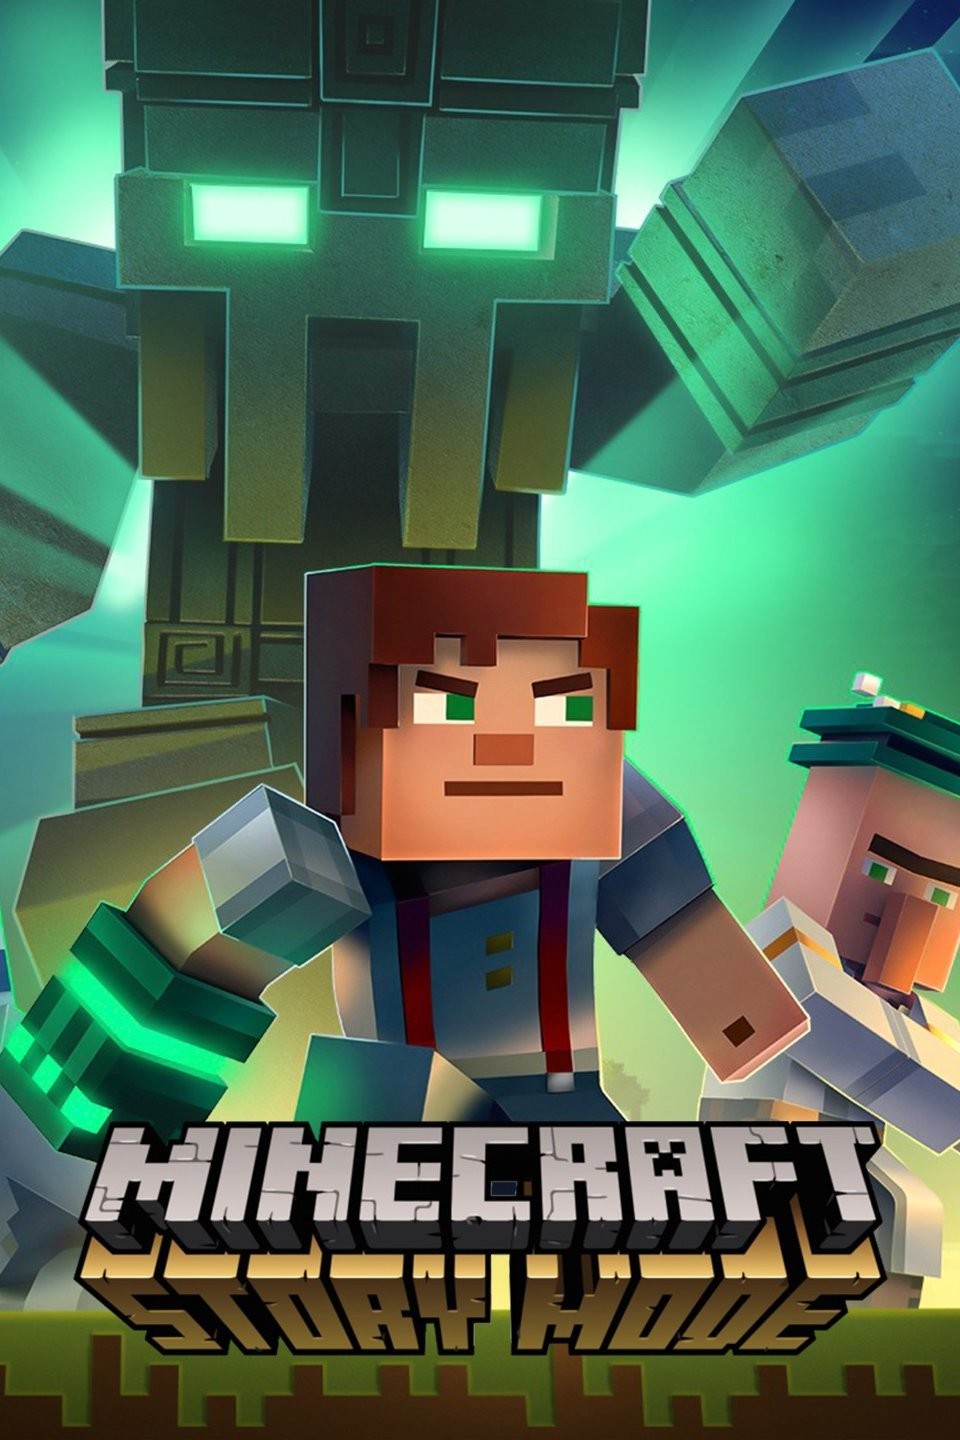 Minecraft: Story Mode Delayed On Netflix, Now Coming Soon